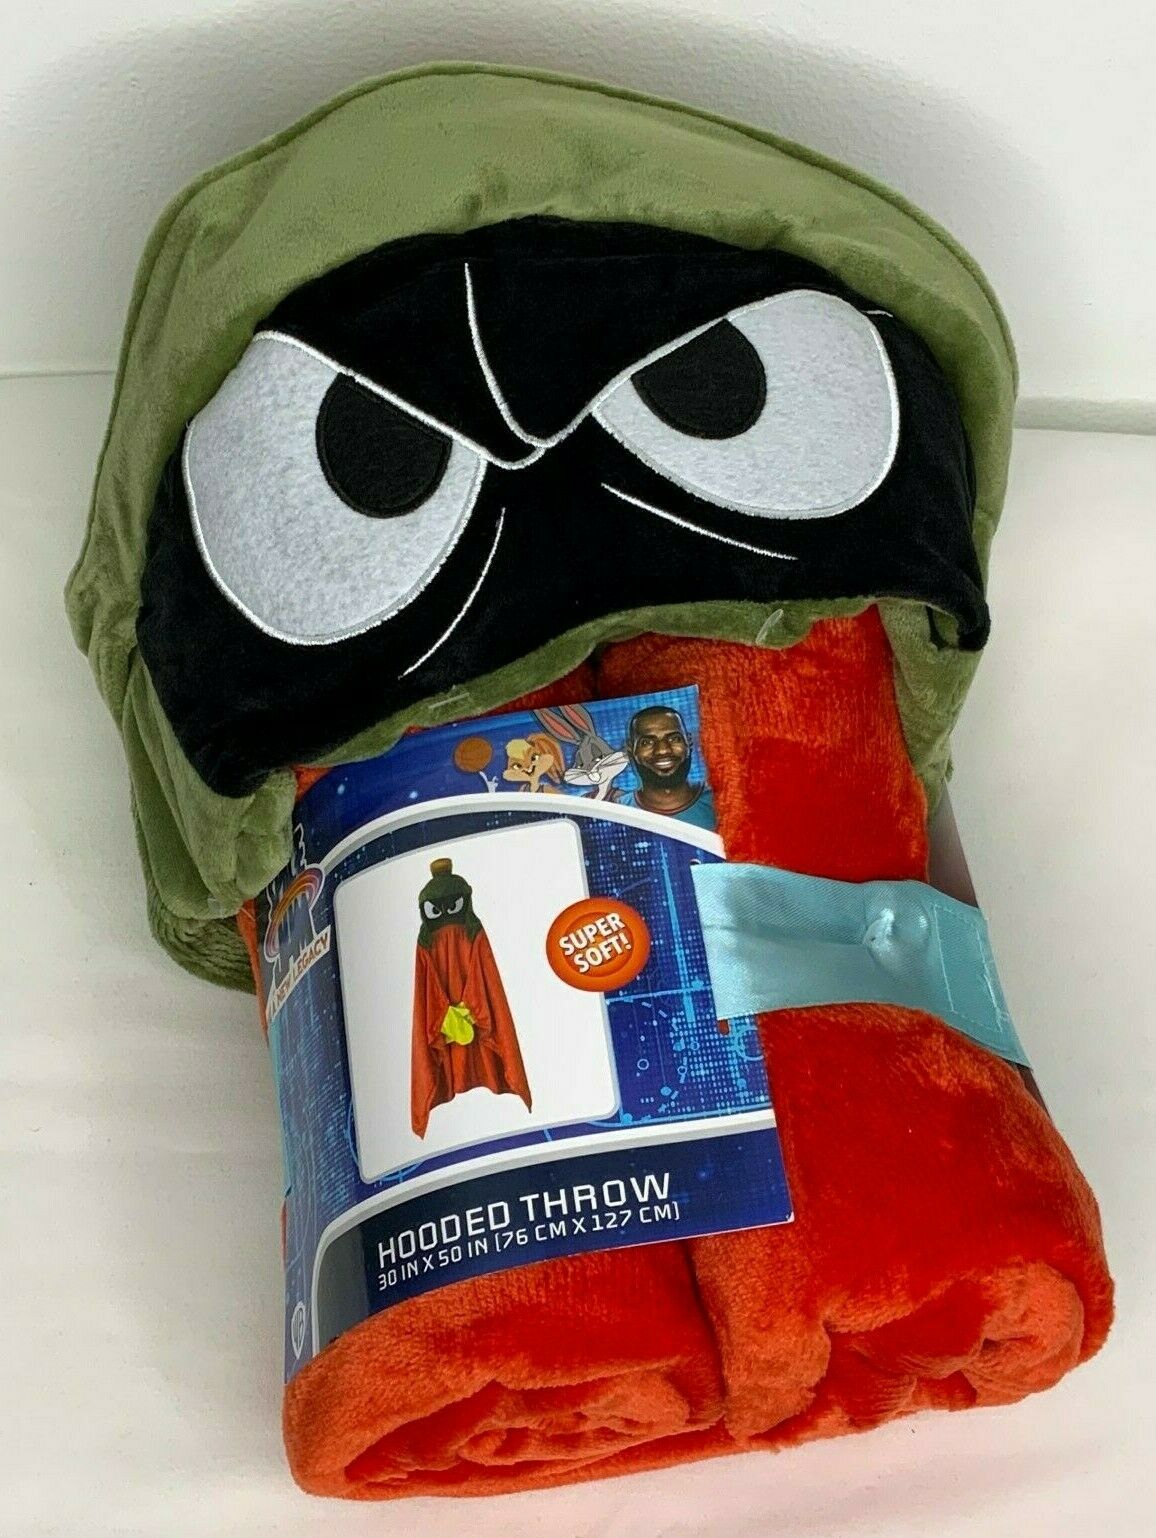 Space Jam Marvin The Martian Hooded Throw Blanket 30" X 50" New